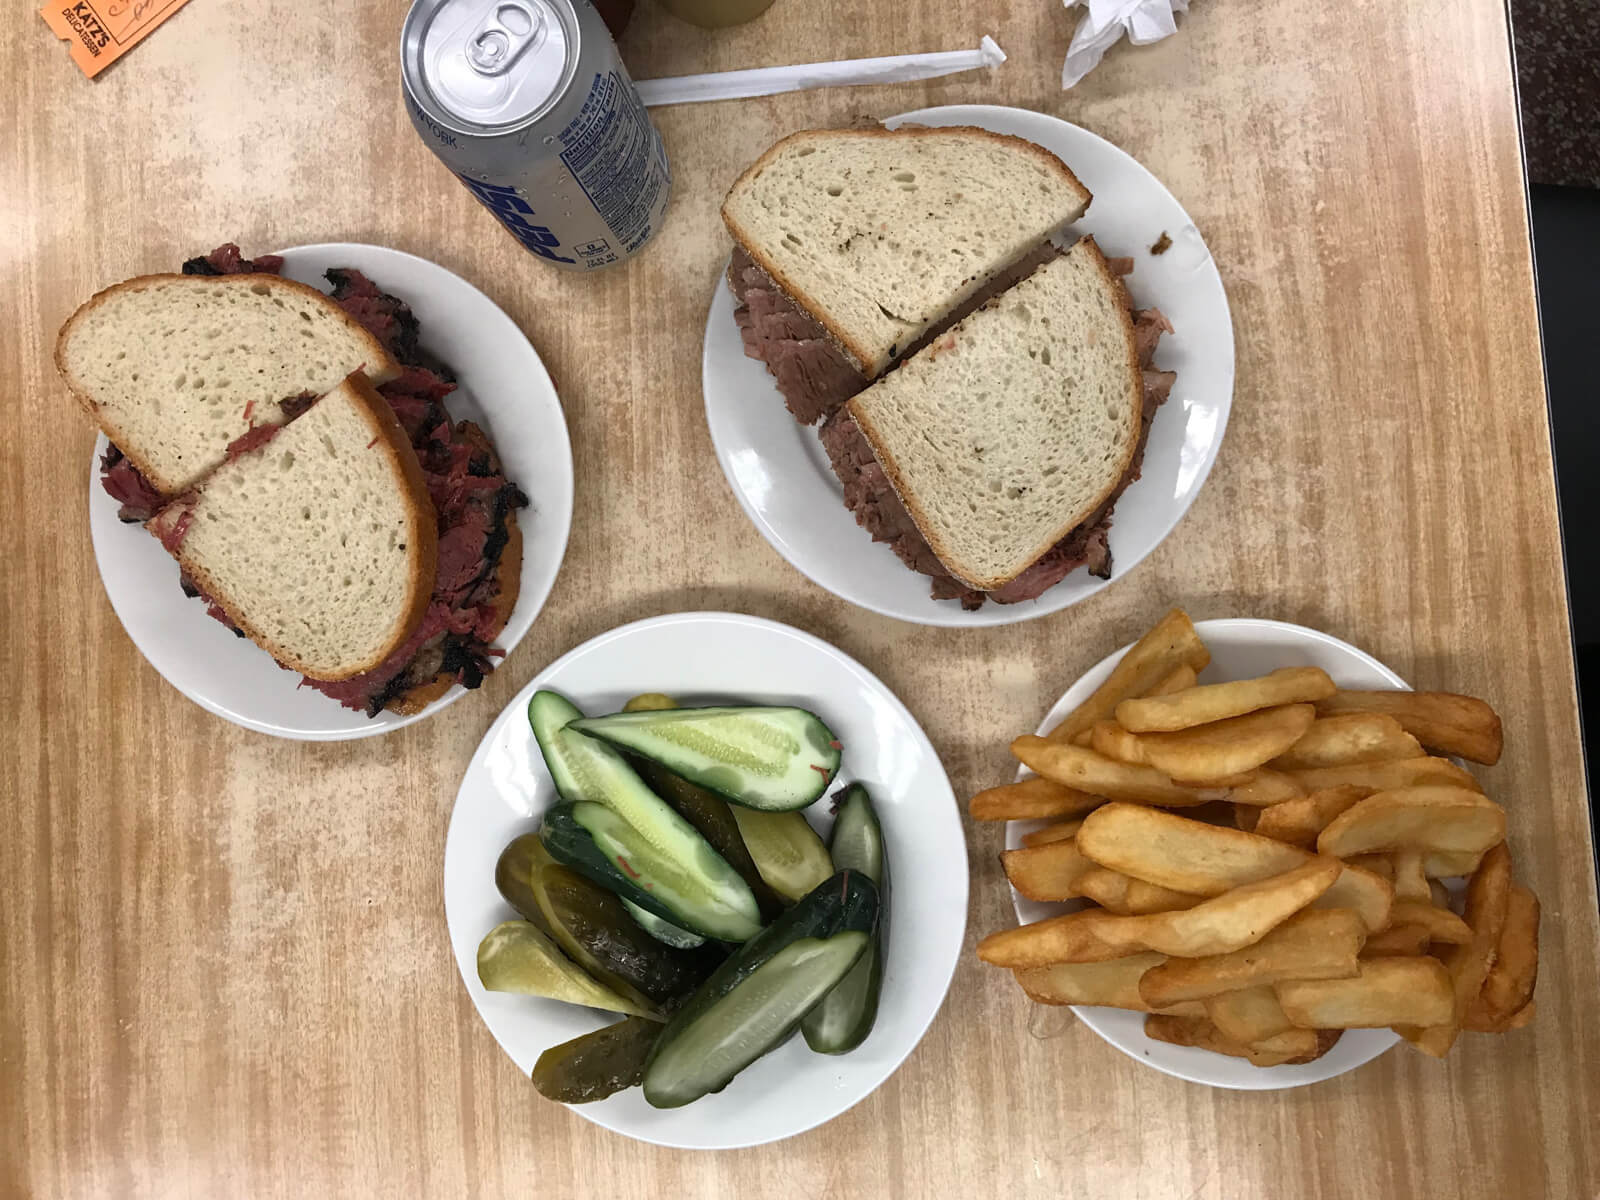 Several white plates on a wooden table – two with sandwiches cut in half, one with green pickles and the other with fries. There is also a can of Pepsi on the table